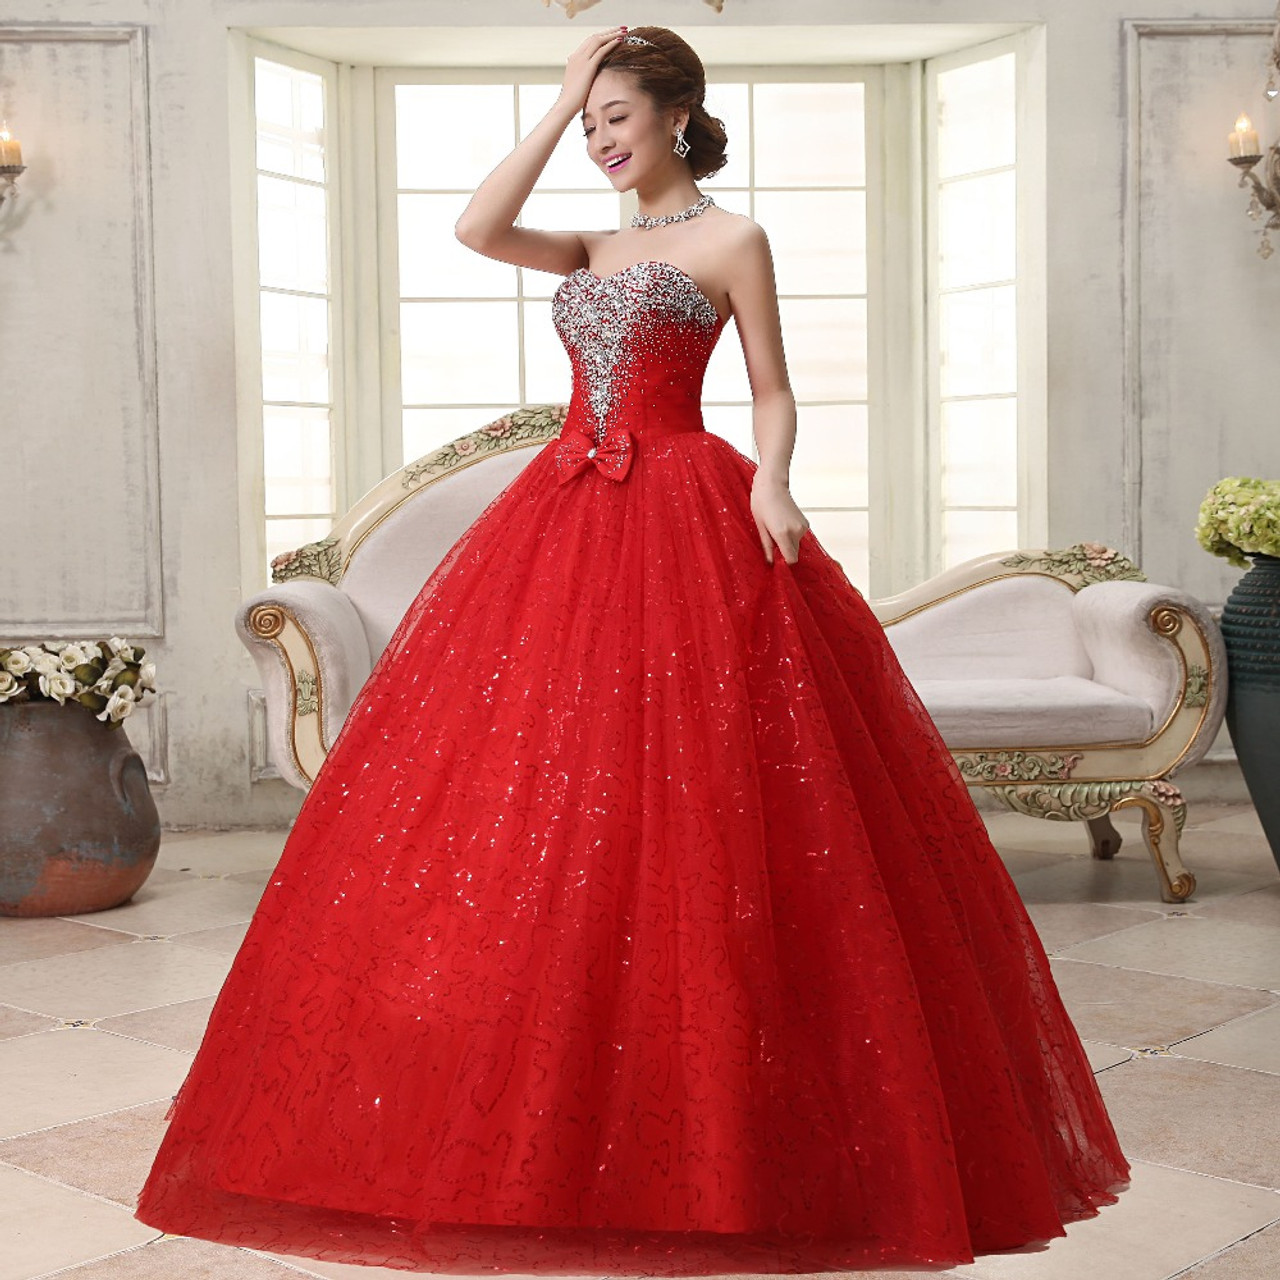 Premium Dazzling Korean Evening Gown / Long Flowy Dress, Women's Fashion,  Dresses & Sets, Evening dresses & gowns on Carousell